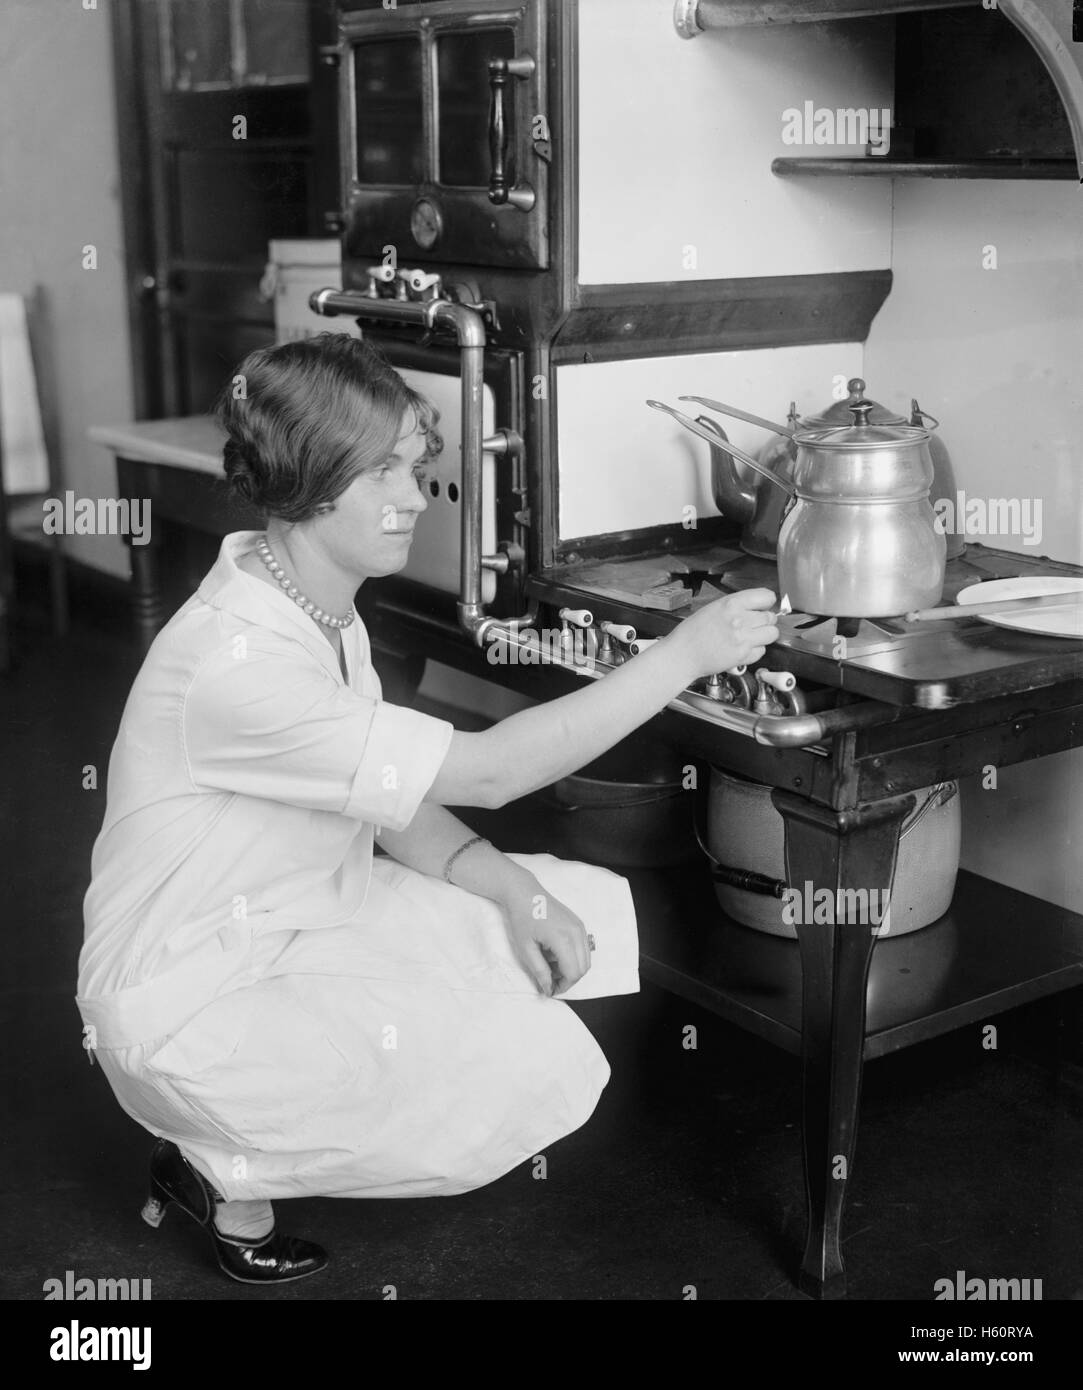 Young Woman Learning to Cook, College Home Economics Class, Washington DC, USA, National Photo Company, December 1926 Stock Photo